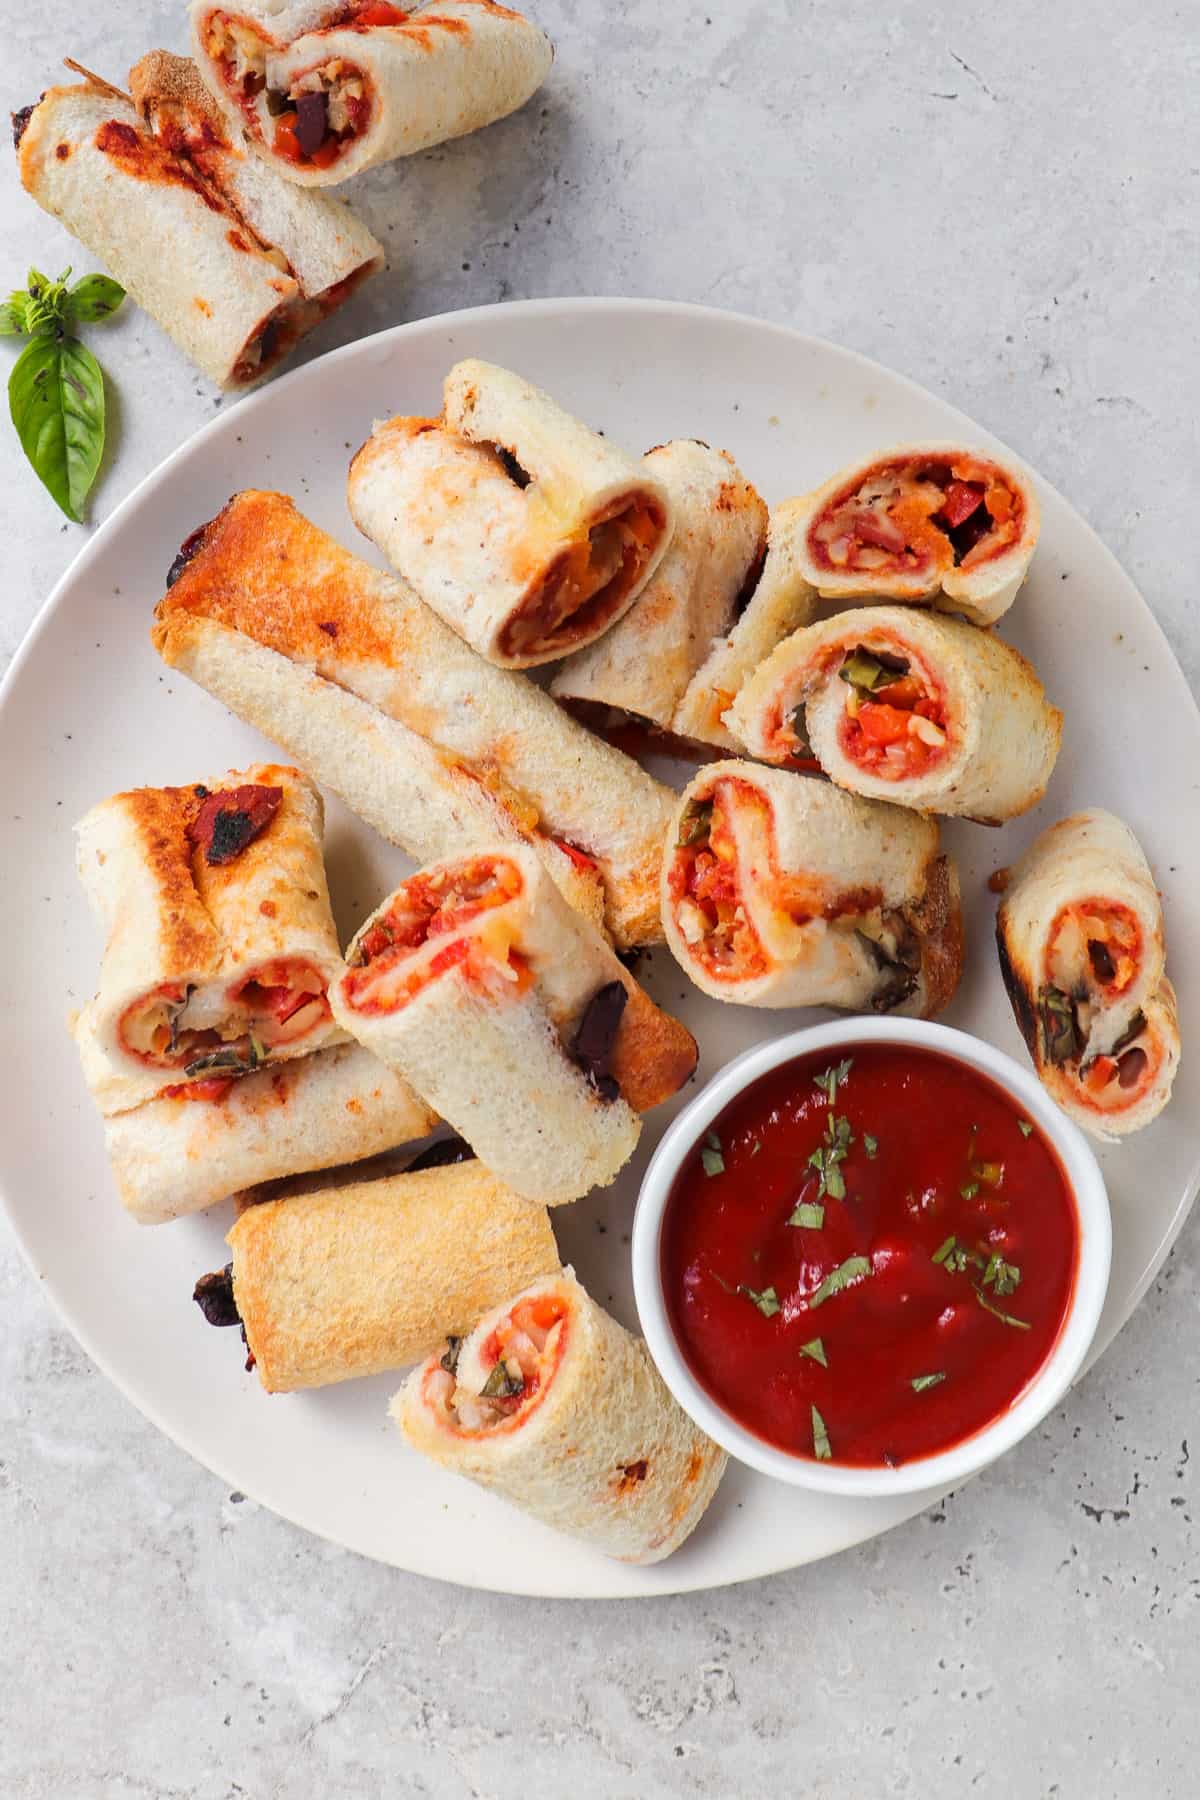 Cooked gluten free pizza rolls on a plate with tomato sauce